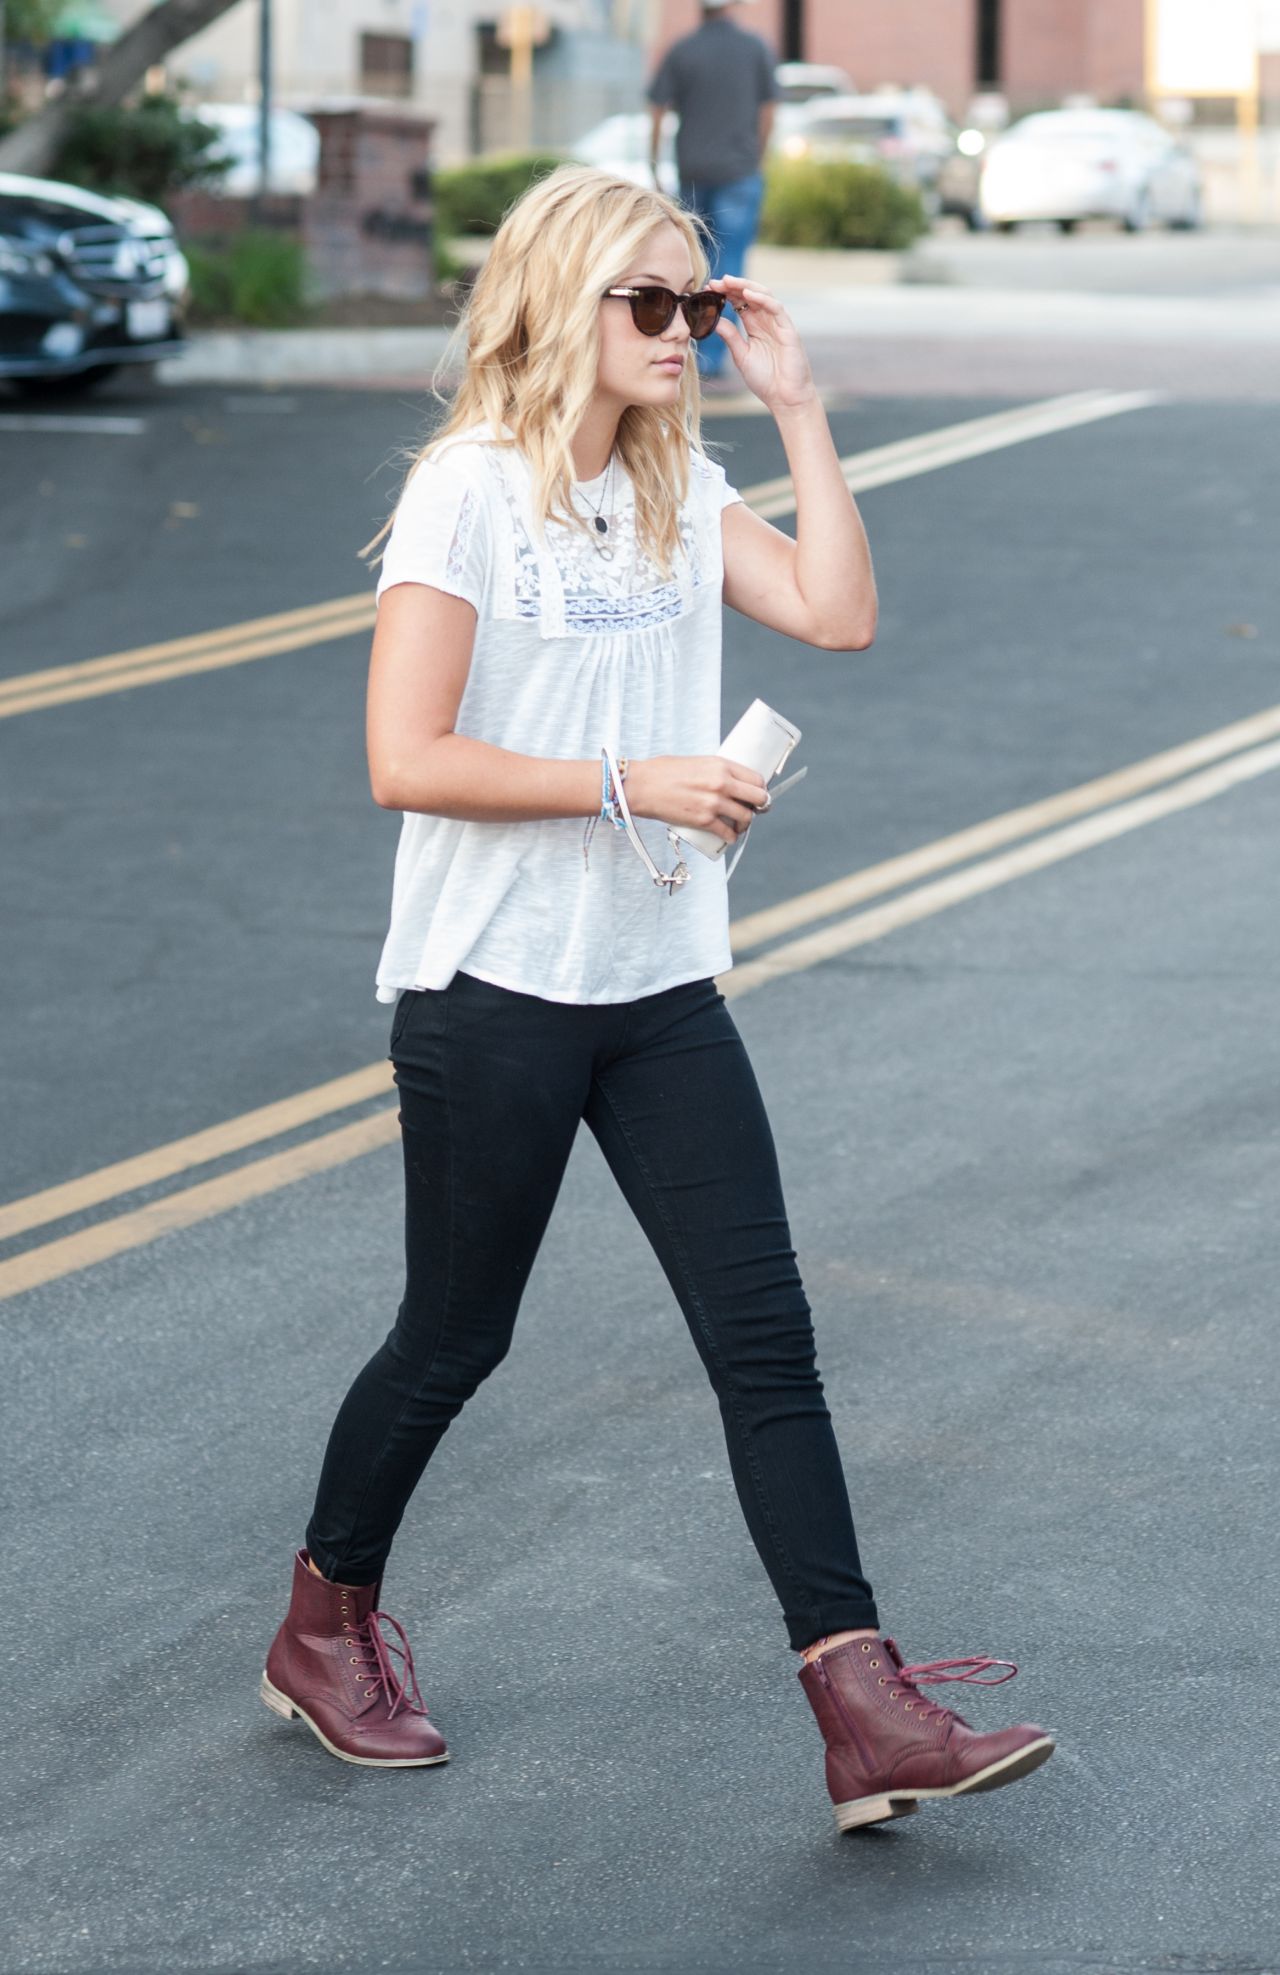 Olivia Holt - Out in Los Angeles, July 2014.